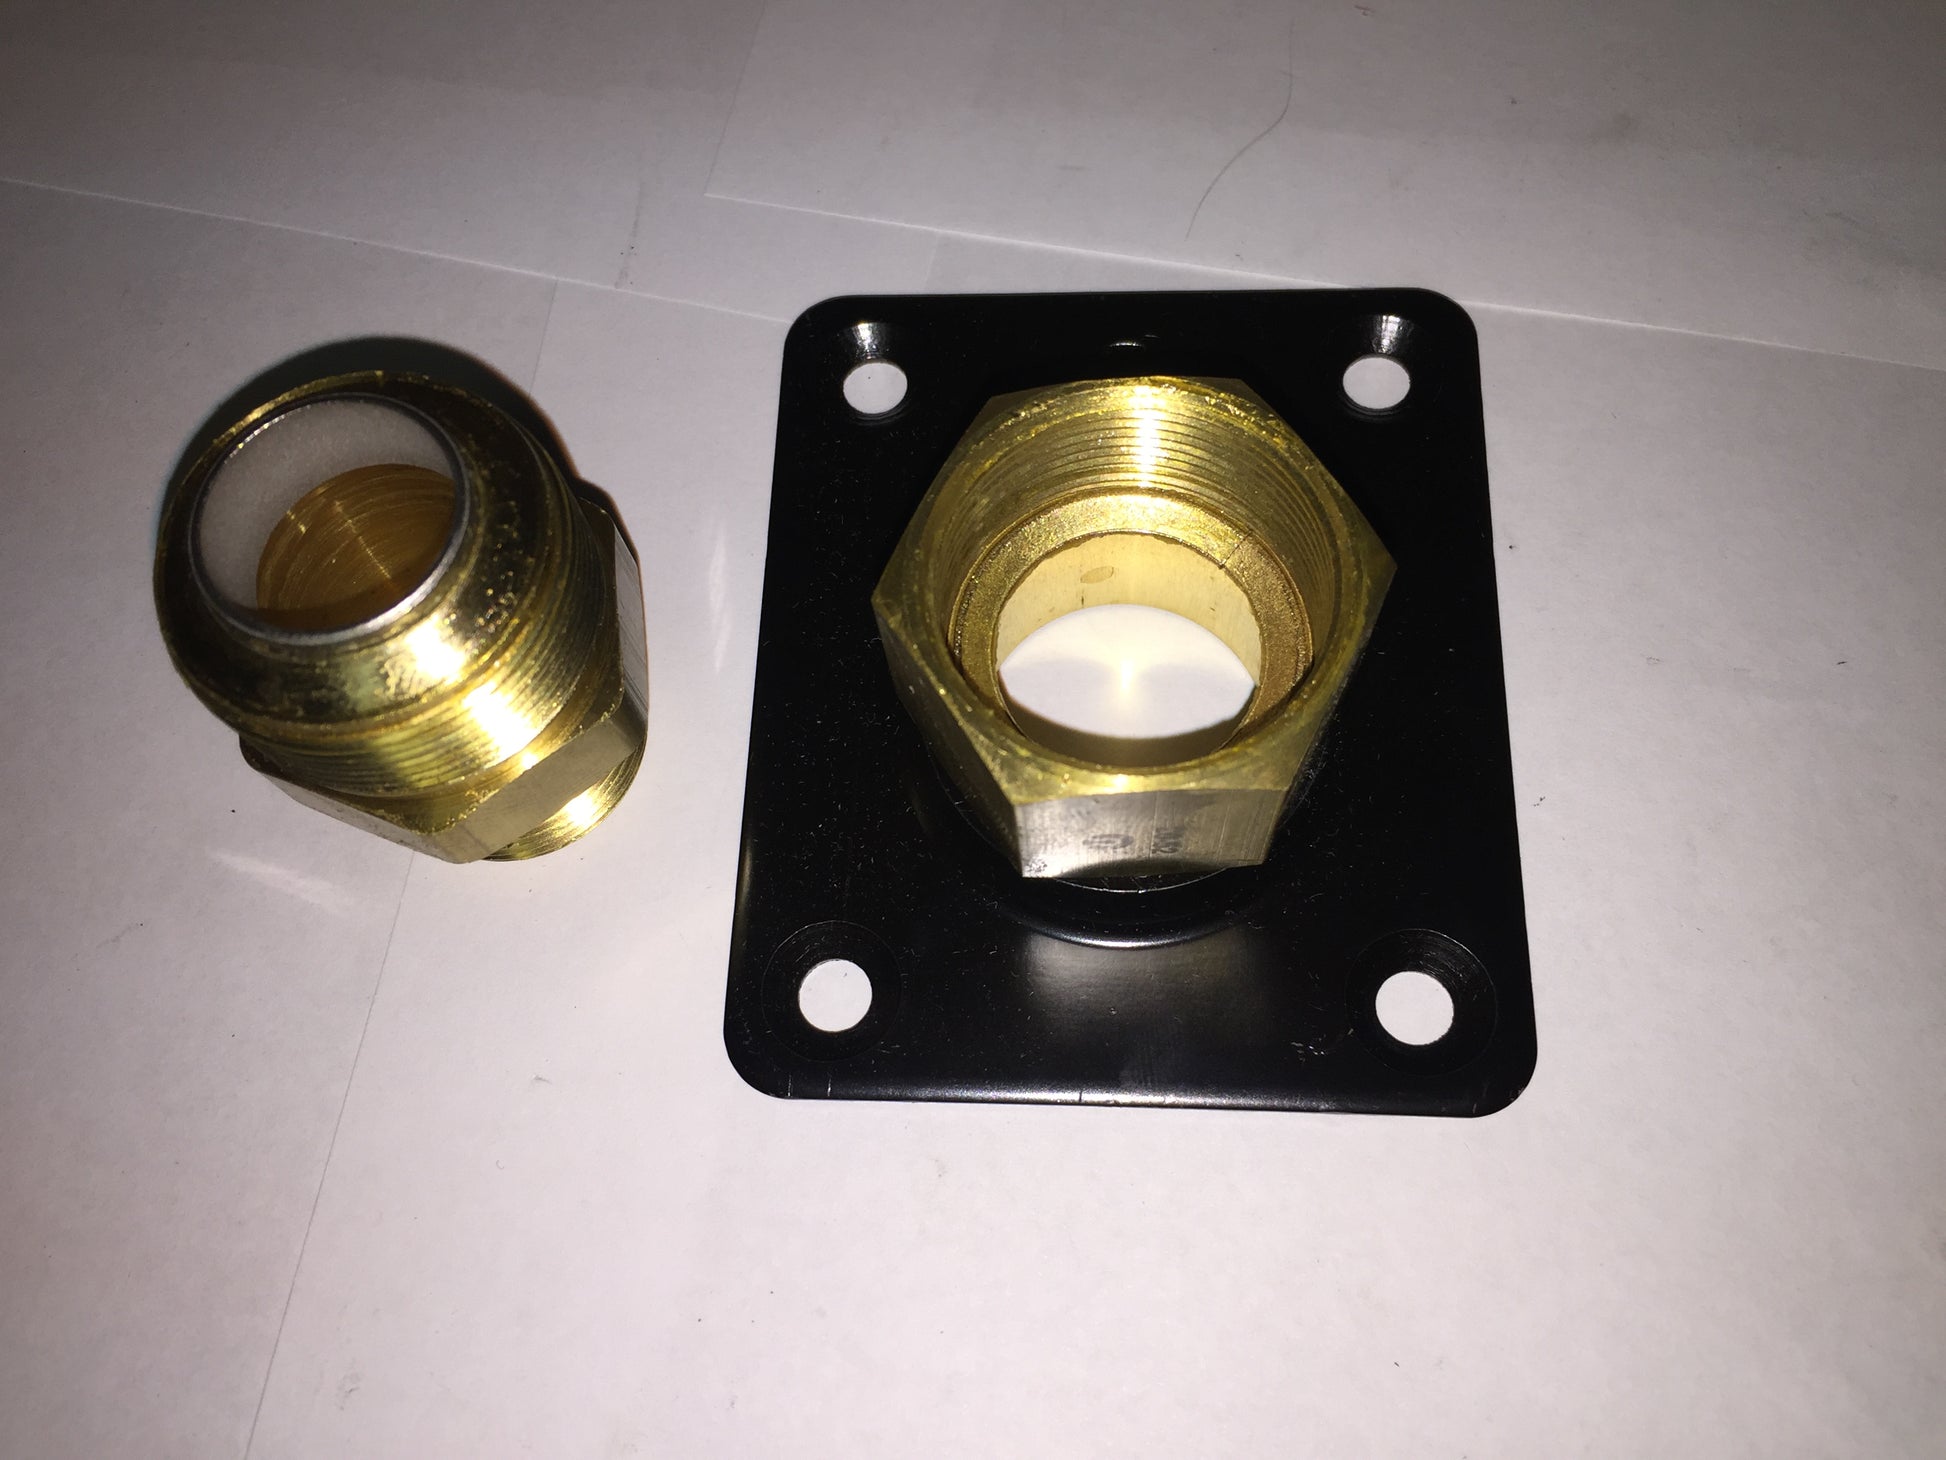 3/4" AUTOFLARE FLANGE FITTING/TERMINATION FOR FLEXIBLE GAS PIPING